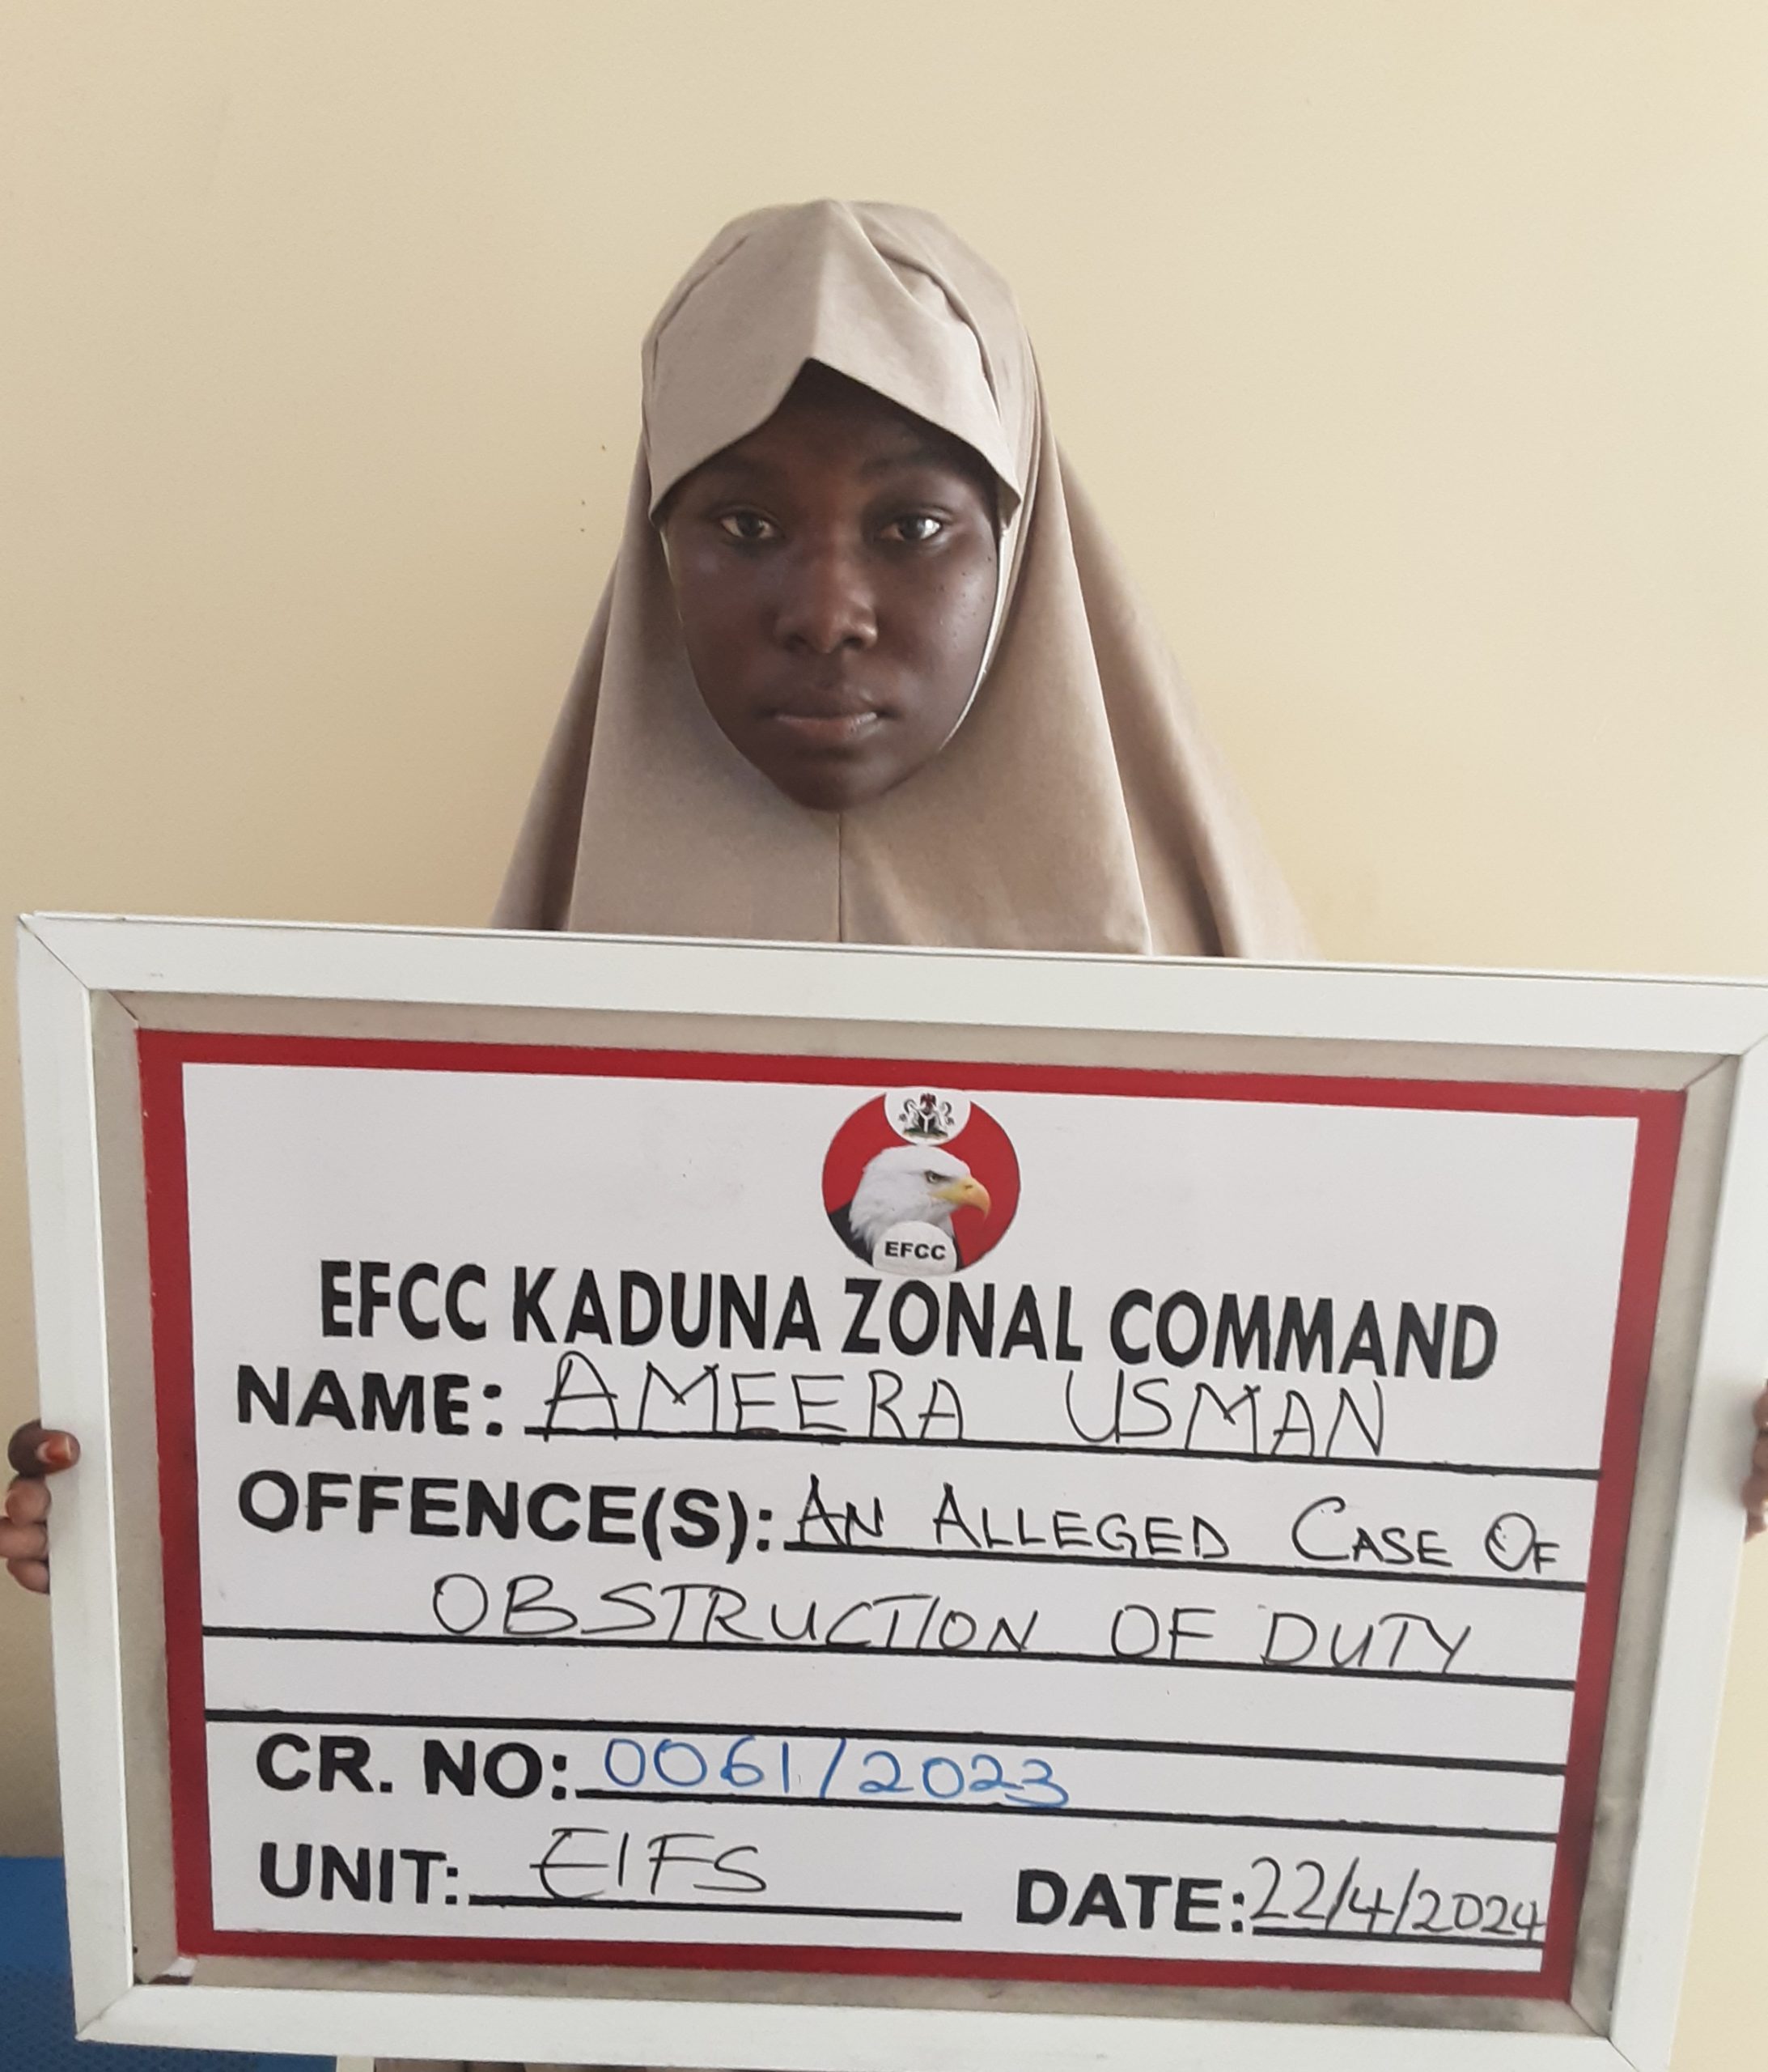 EFCC arraigns 4 for alleged obstruction of justice in Kaduna